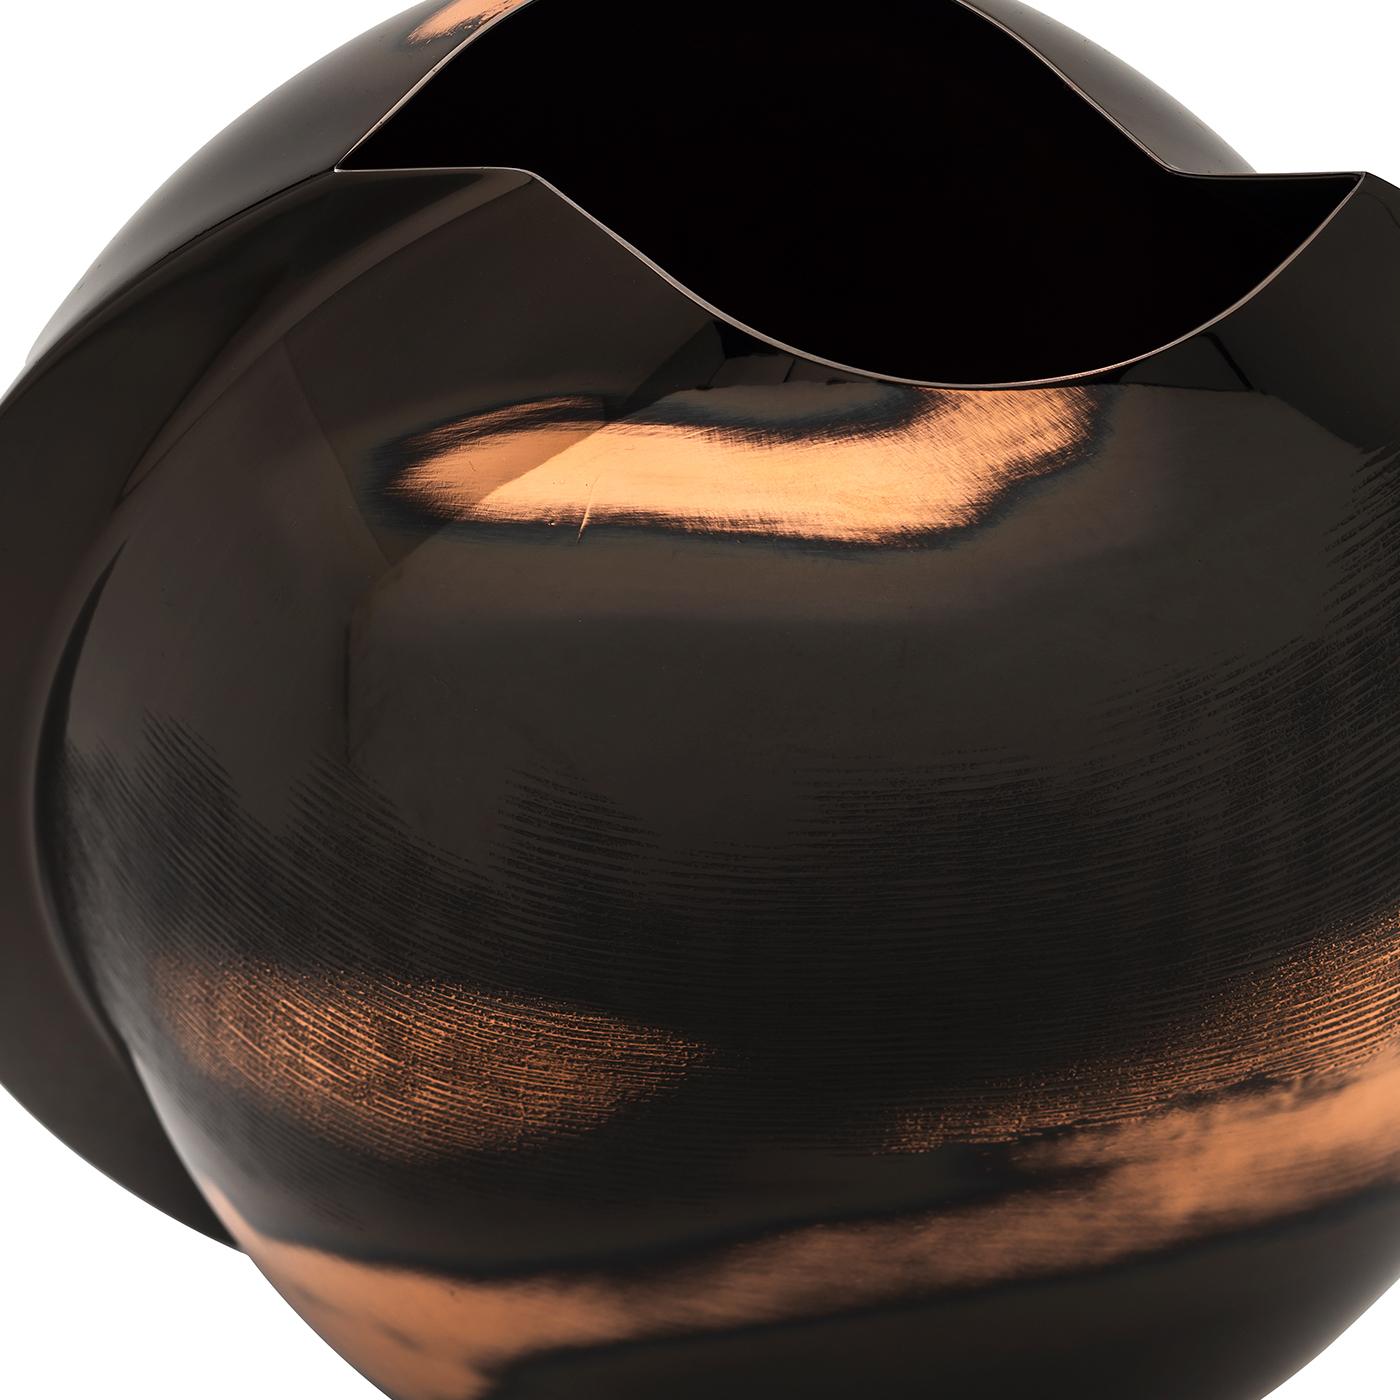 An exquisite example of refined craftsmanship, this vase is made of titanium and copper with a polished finish that adds a luminous and elegant allure to this unique piece of decor. Part of a numbered series, this vase makes a splendid gift on any